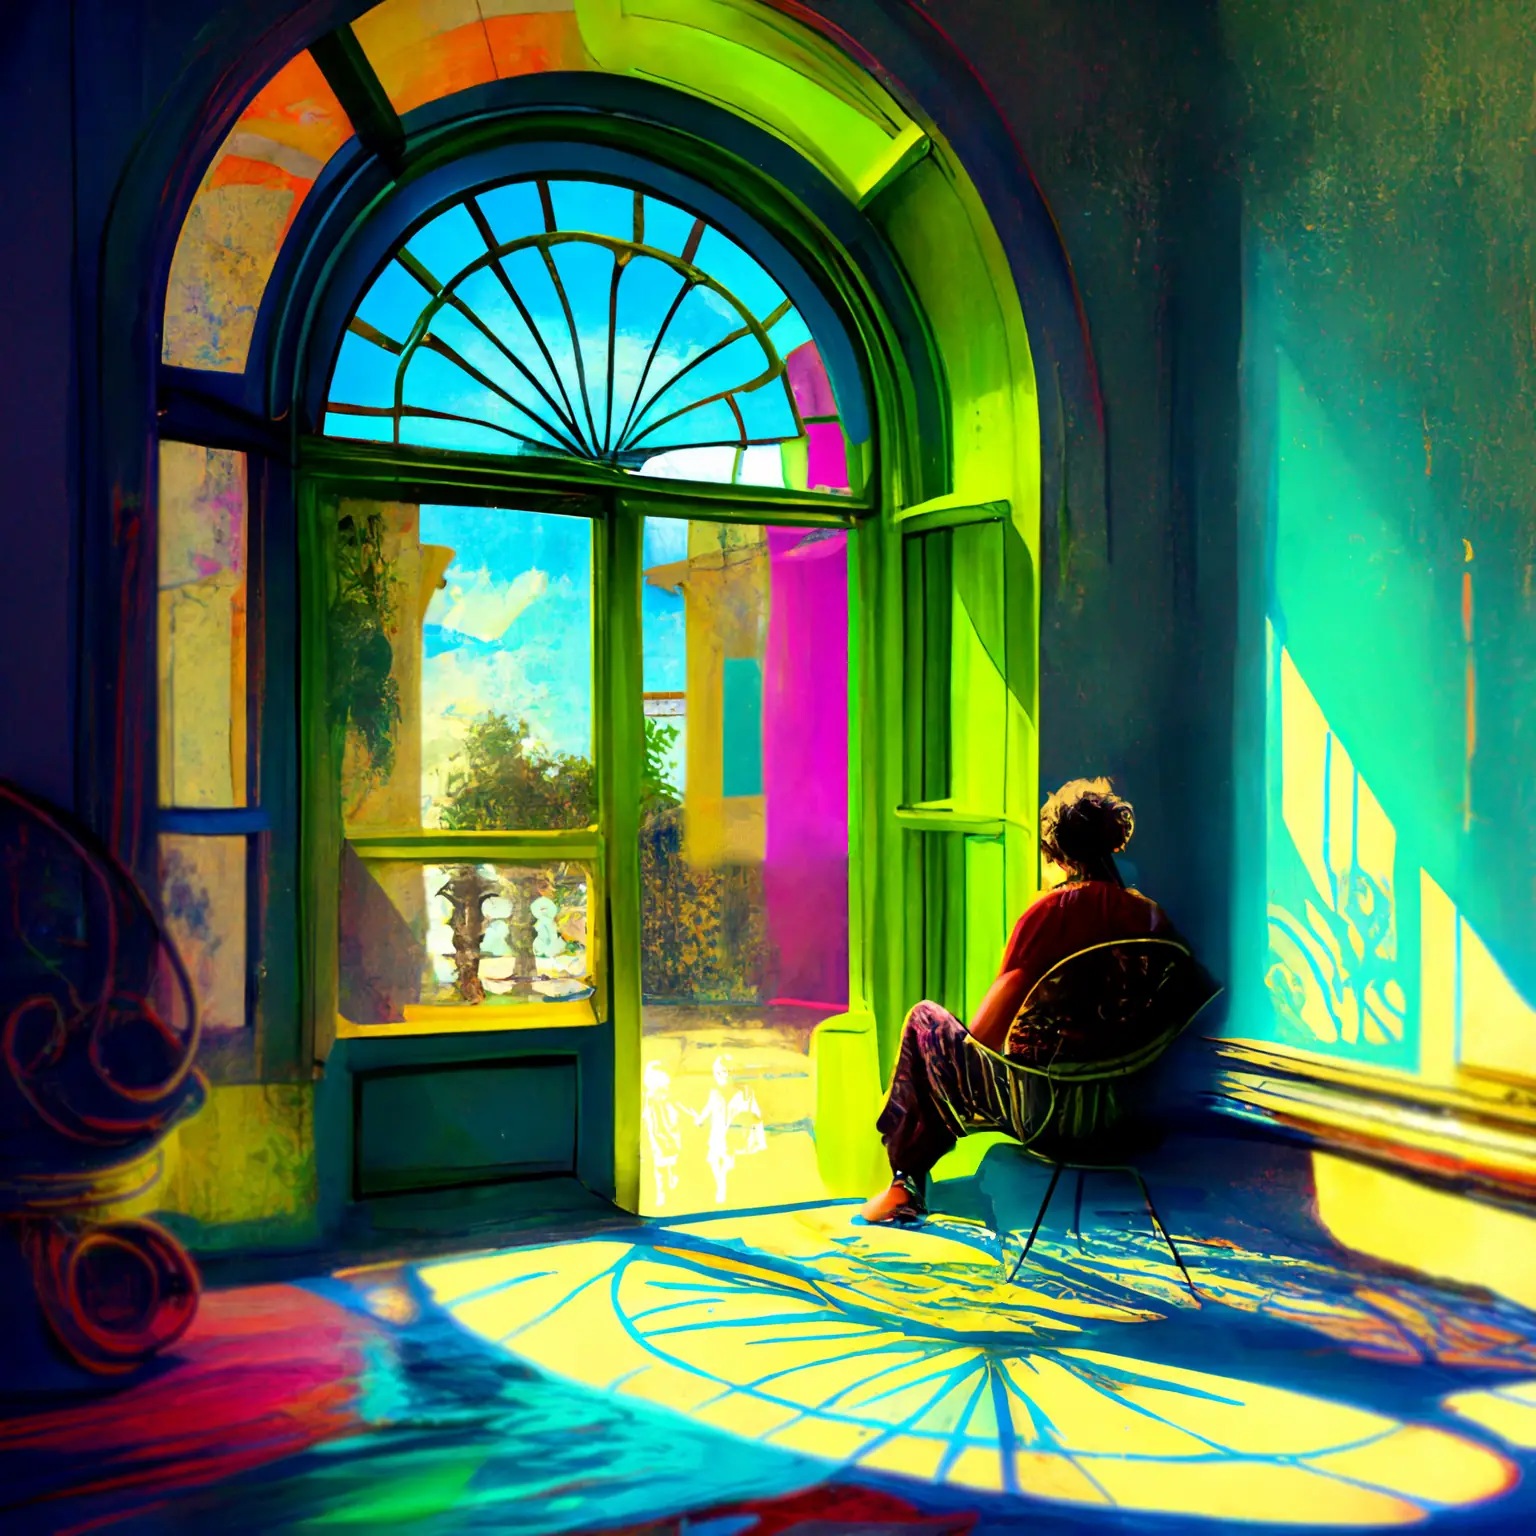 A colourful artistic rendering of a figure sitting in a chair in a room. The figure is facing an open door and looking out onto a bright, colourful courtyard.